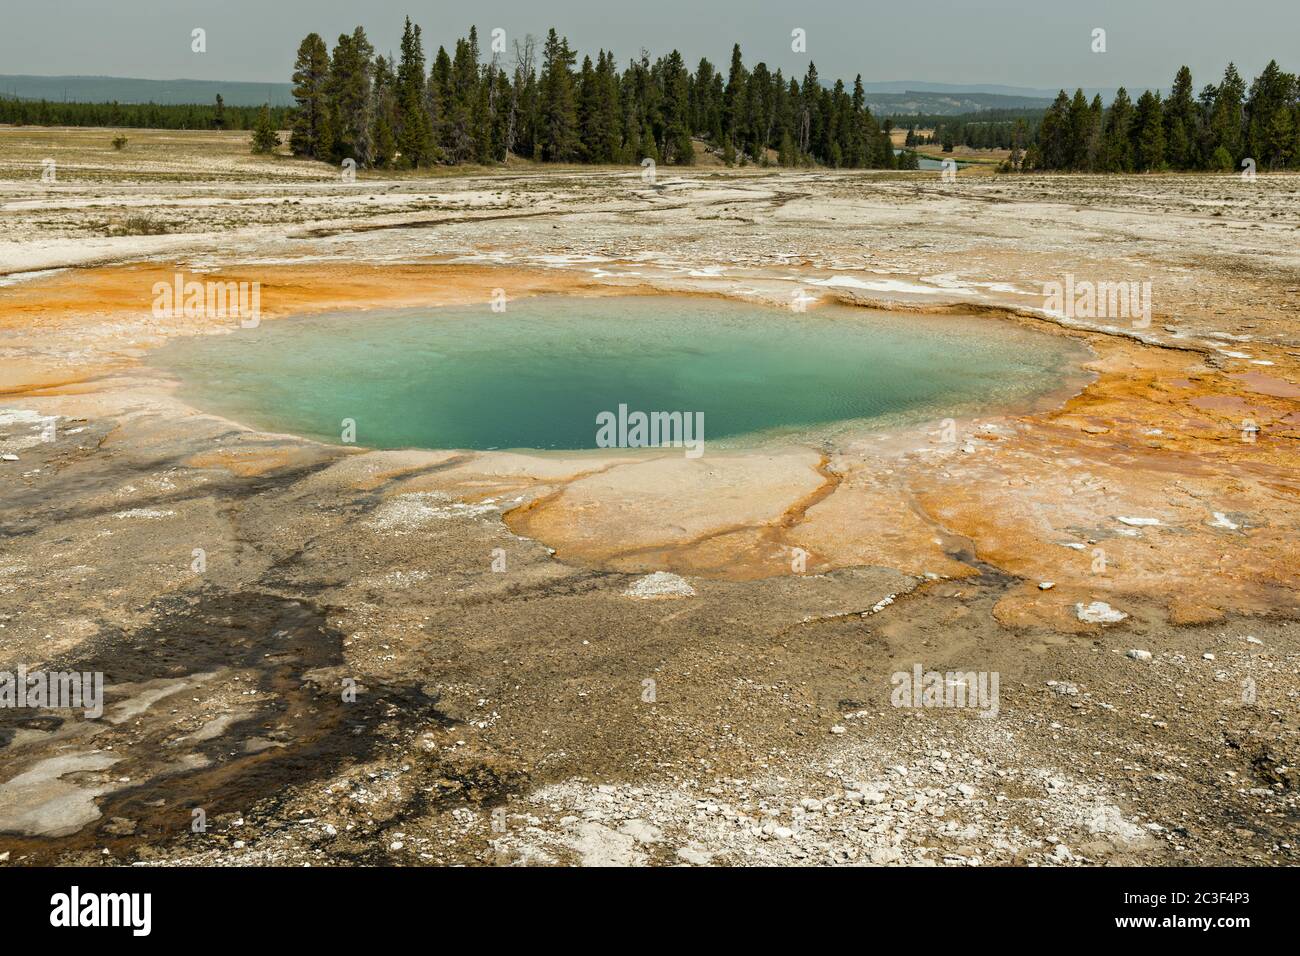 Turquoise Pool in Yellowstone National Park. The bright colors around the spring are from cyanobacteria mats. The Turquoise Pool is next to the Grand Prismatic Spring and part of the Midway Geyser Basin Excelsior Group in Yellowstone, Wyoming. Stock Photo